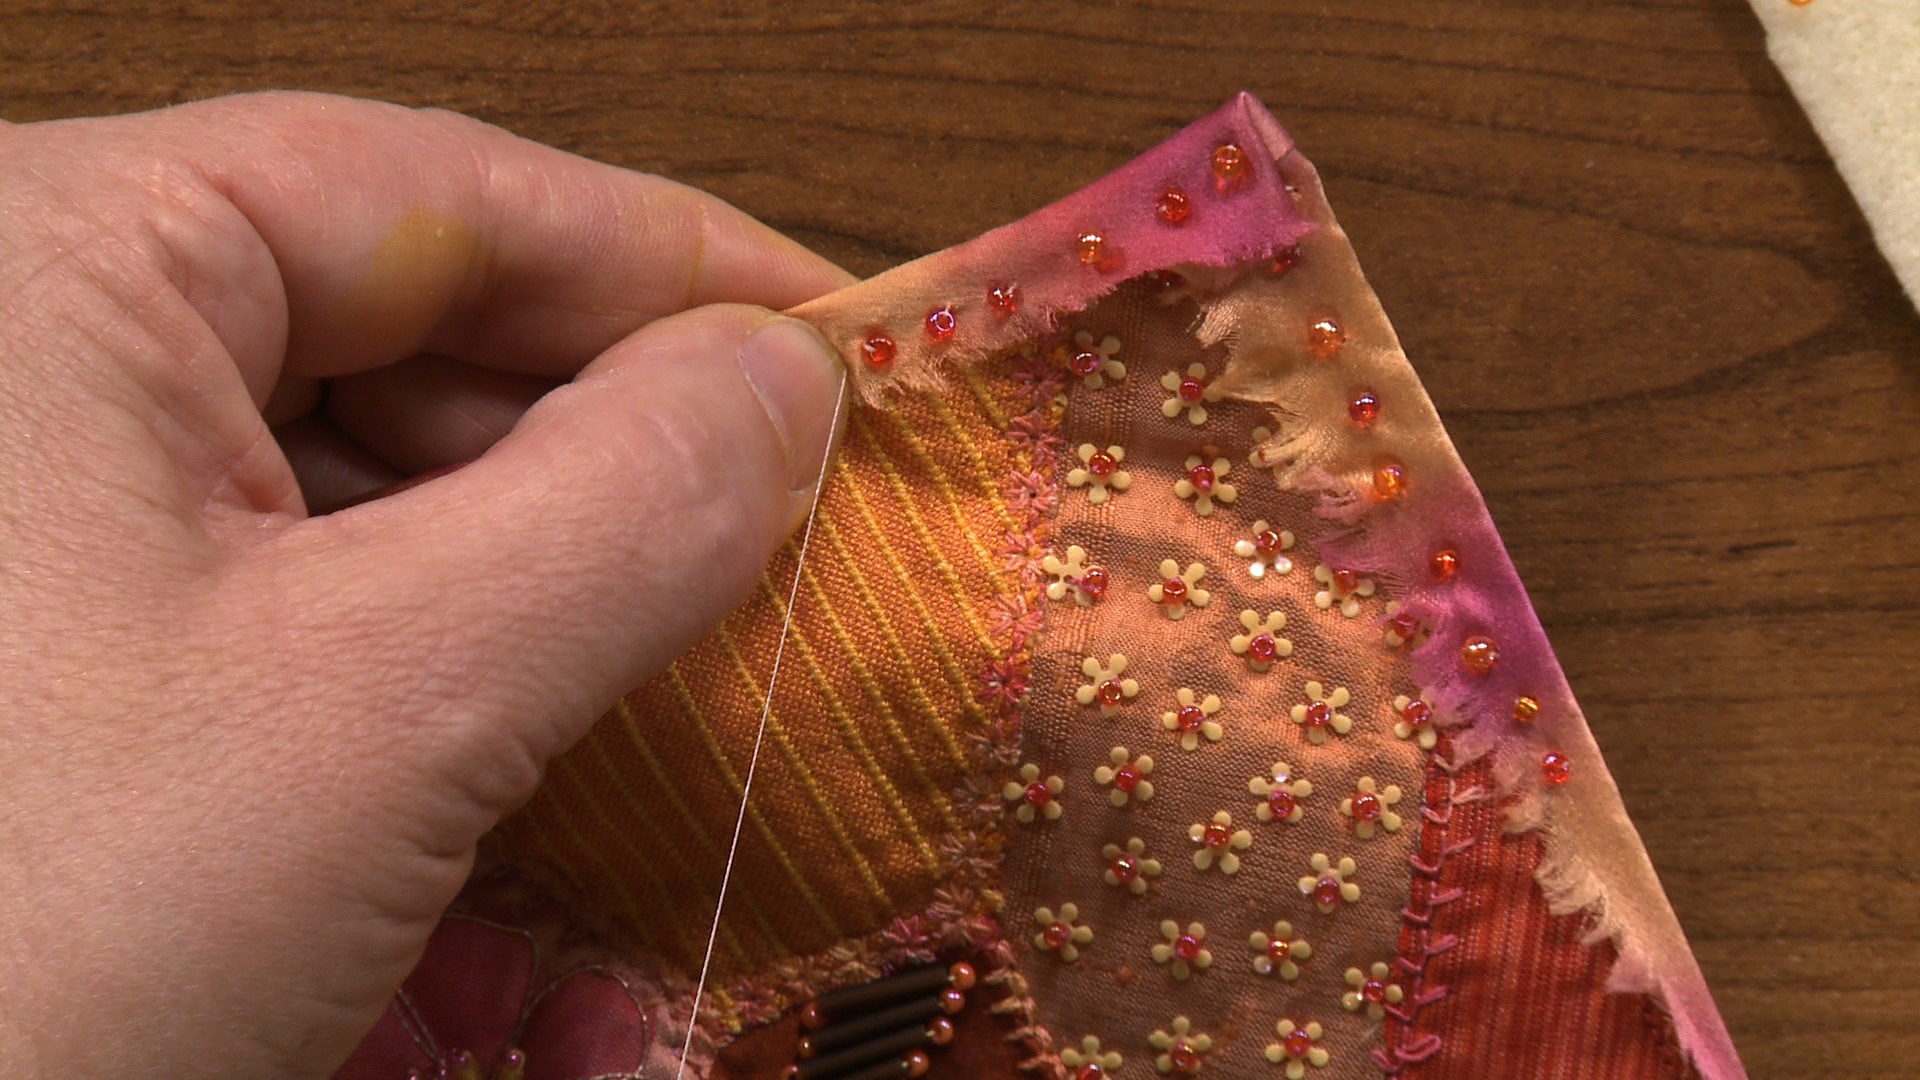 Binding a Quilt with Ribbon and Beads